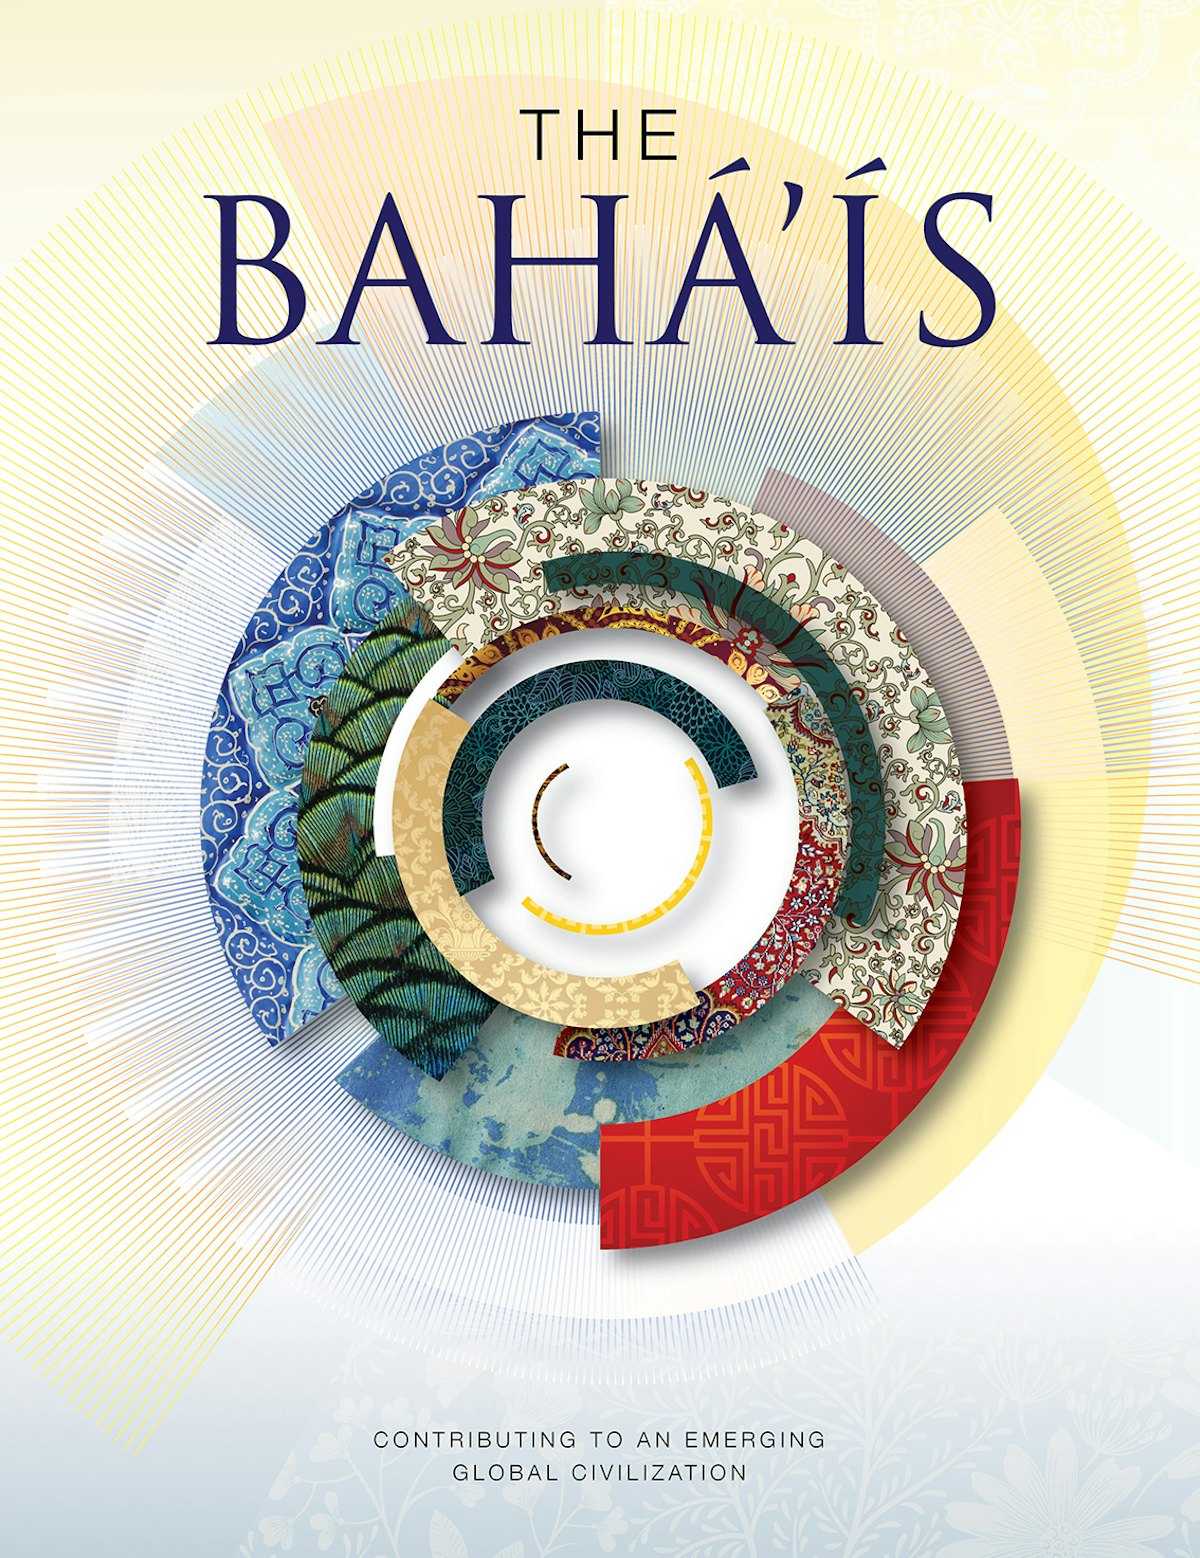 A new edition of The Baha’is was published in September. Copies can be ordered online at the U.S. Baha'i Distribution Service website.